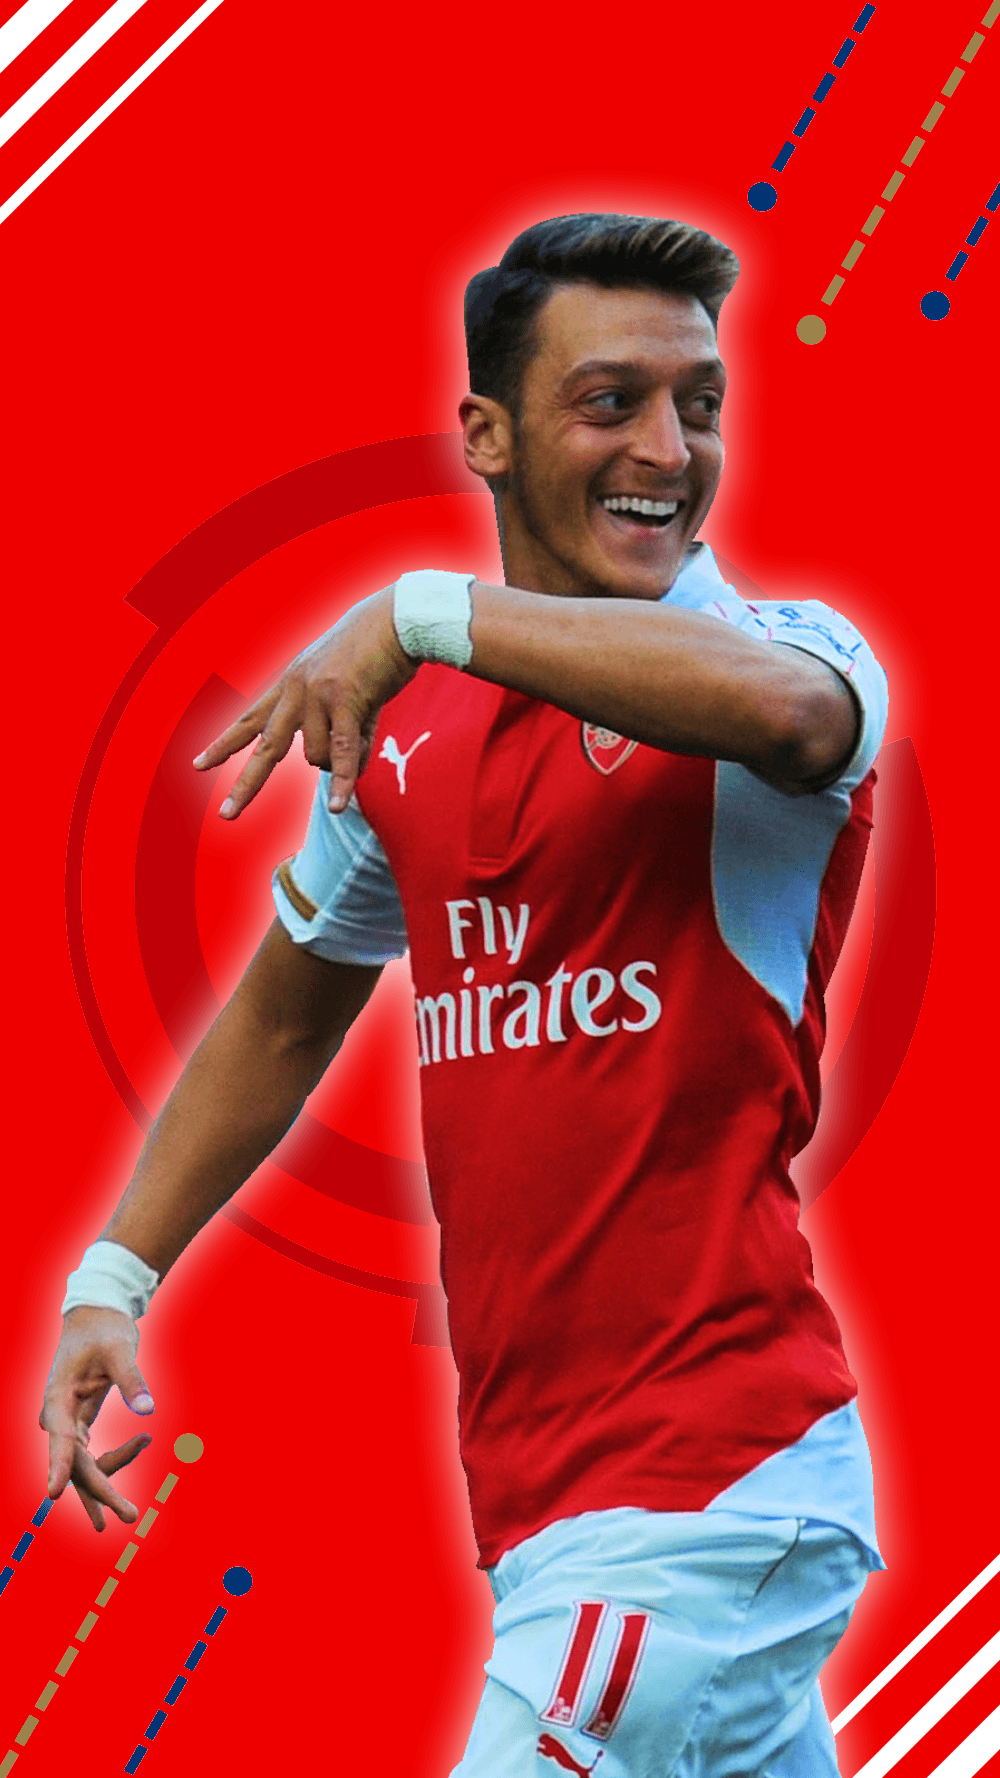 I made a Mesut Özil phone wallpaper that I thought you guys would